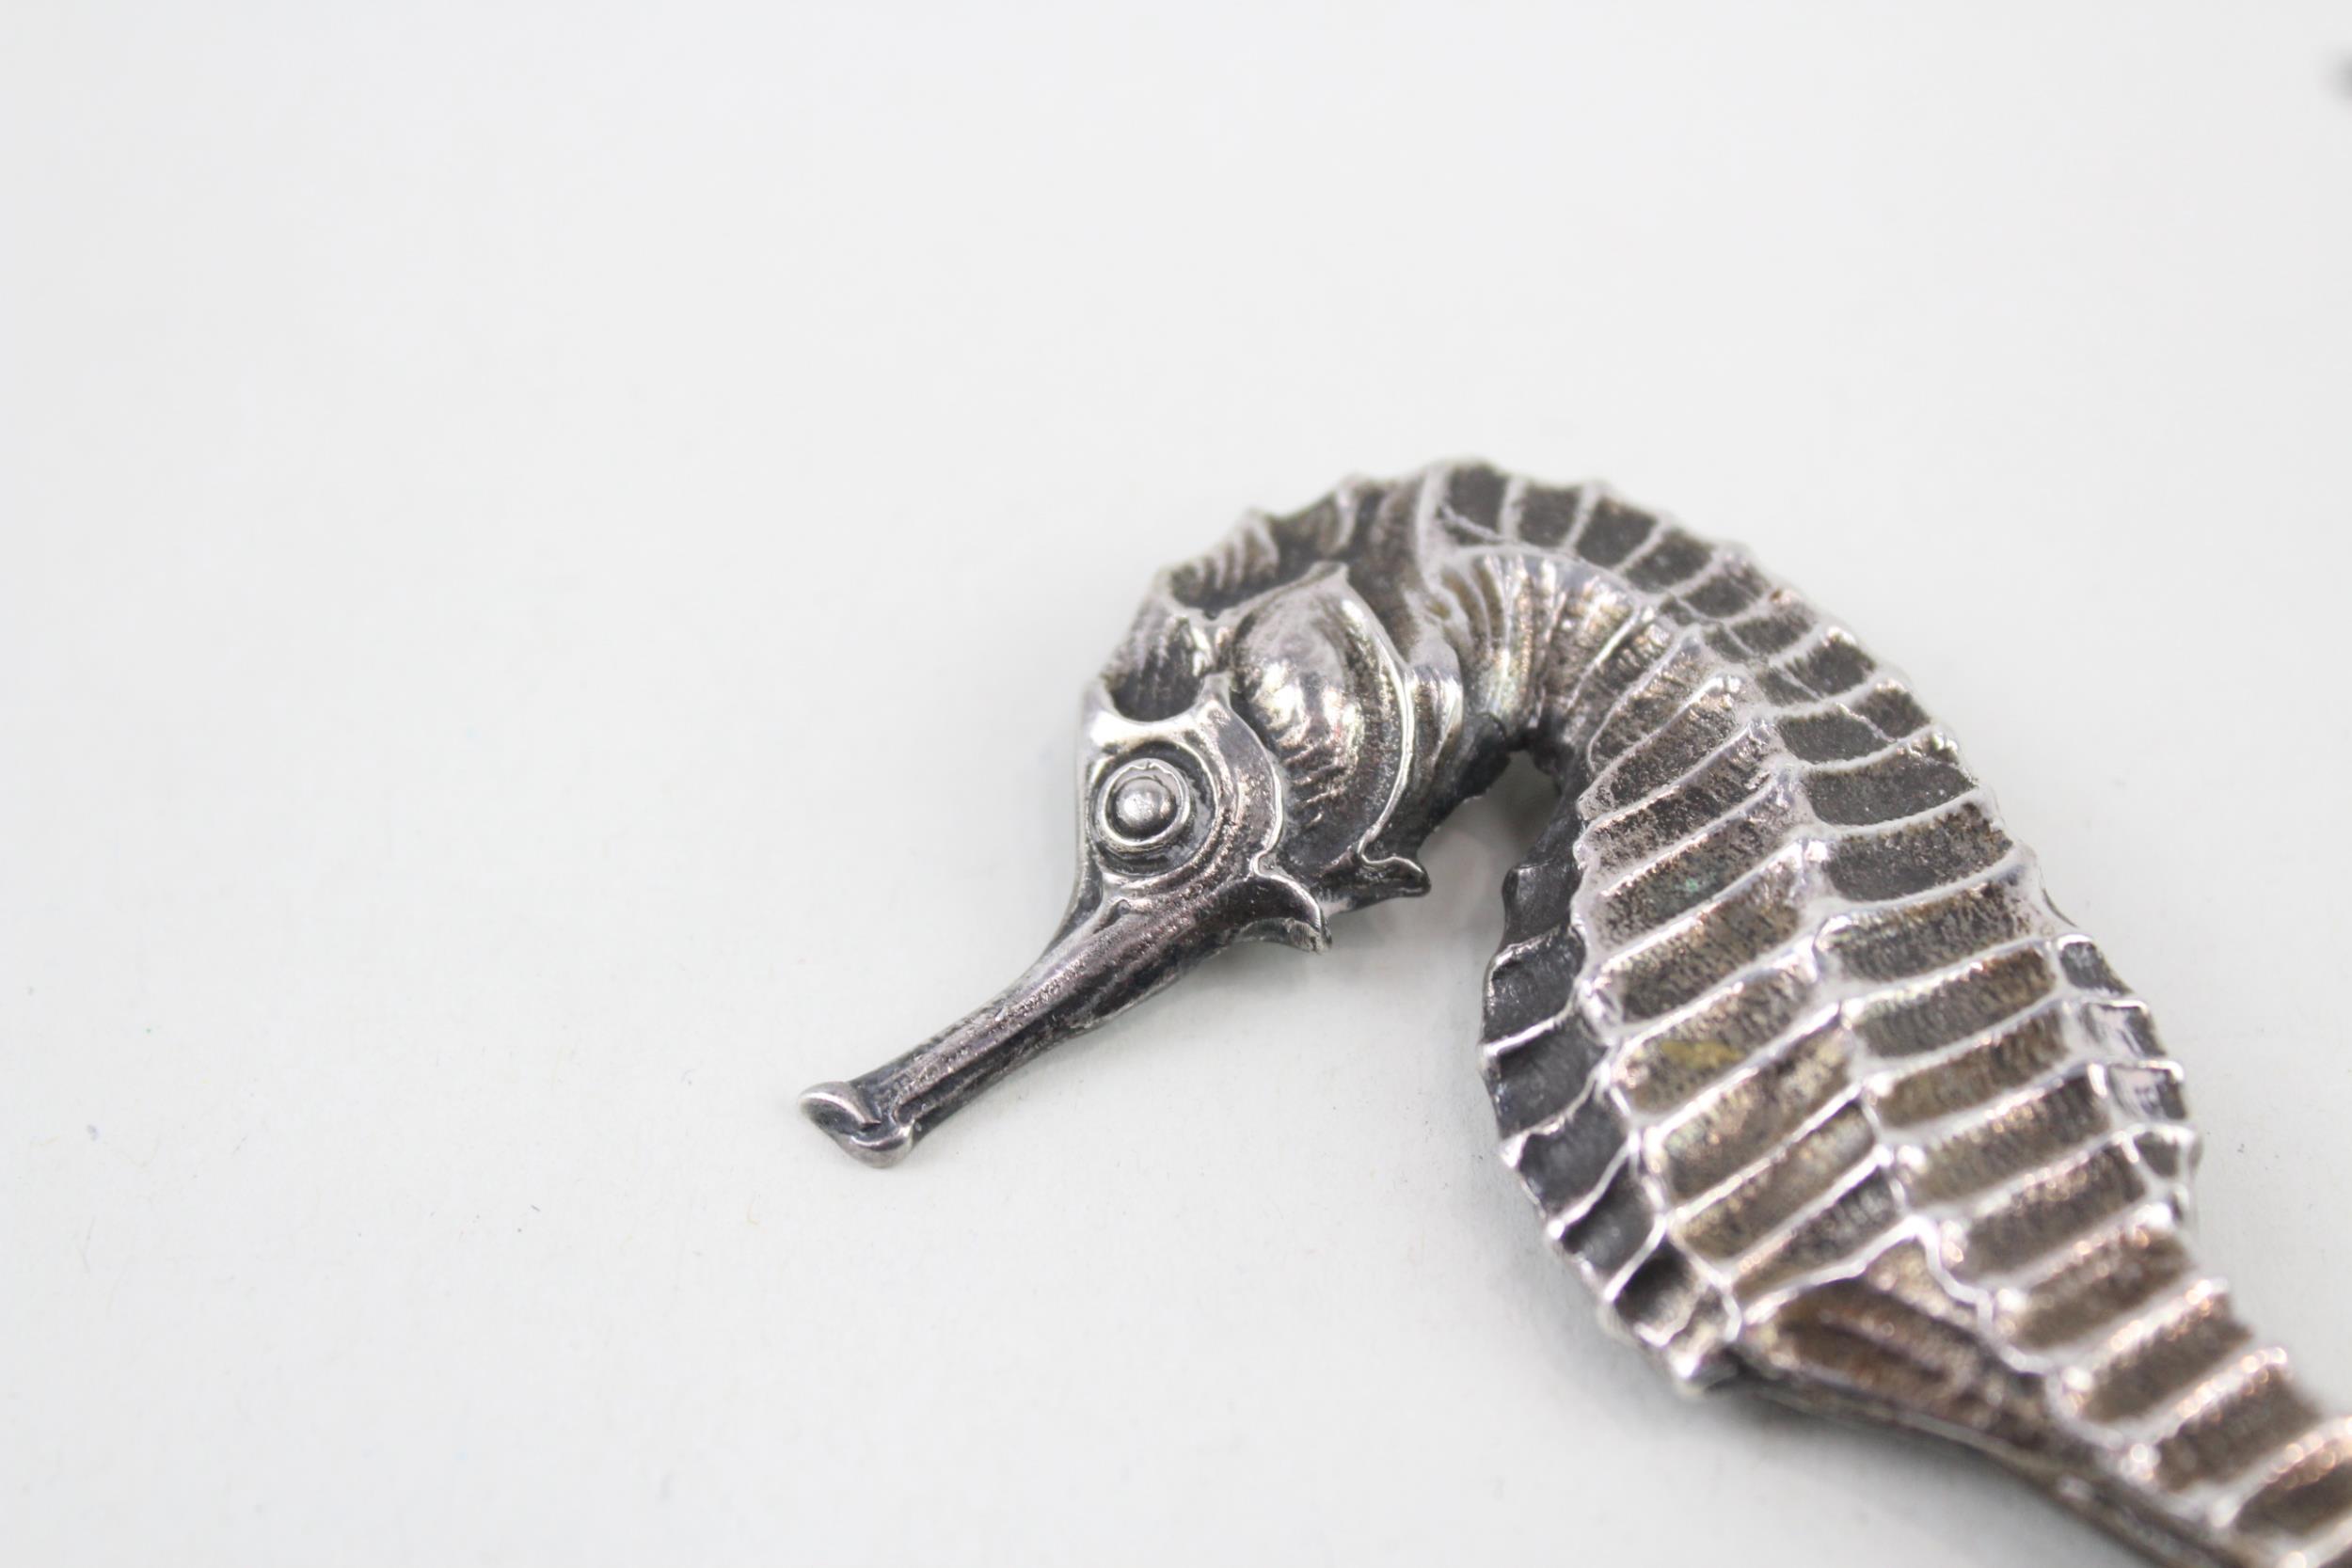 Silver seahorse brooch stamped Black, Starr & Gorham by Cini (15g) - Image 2 of 7